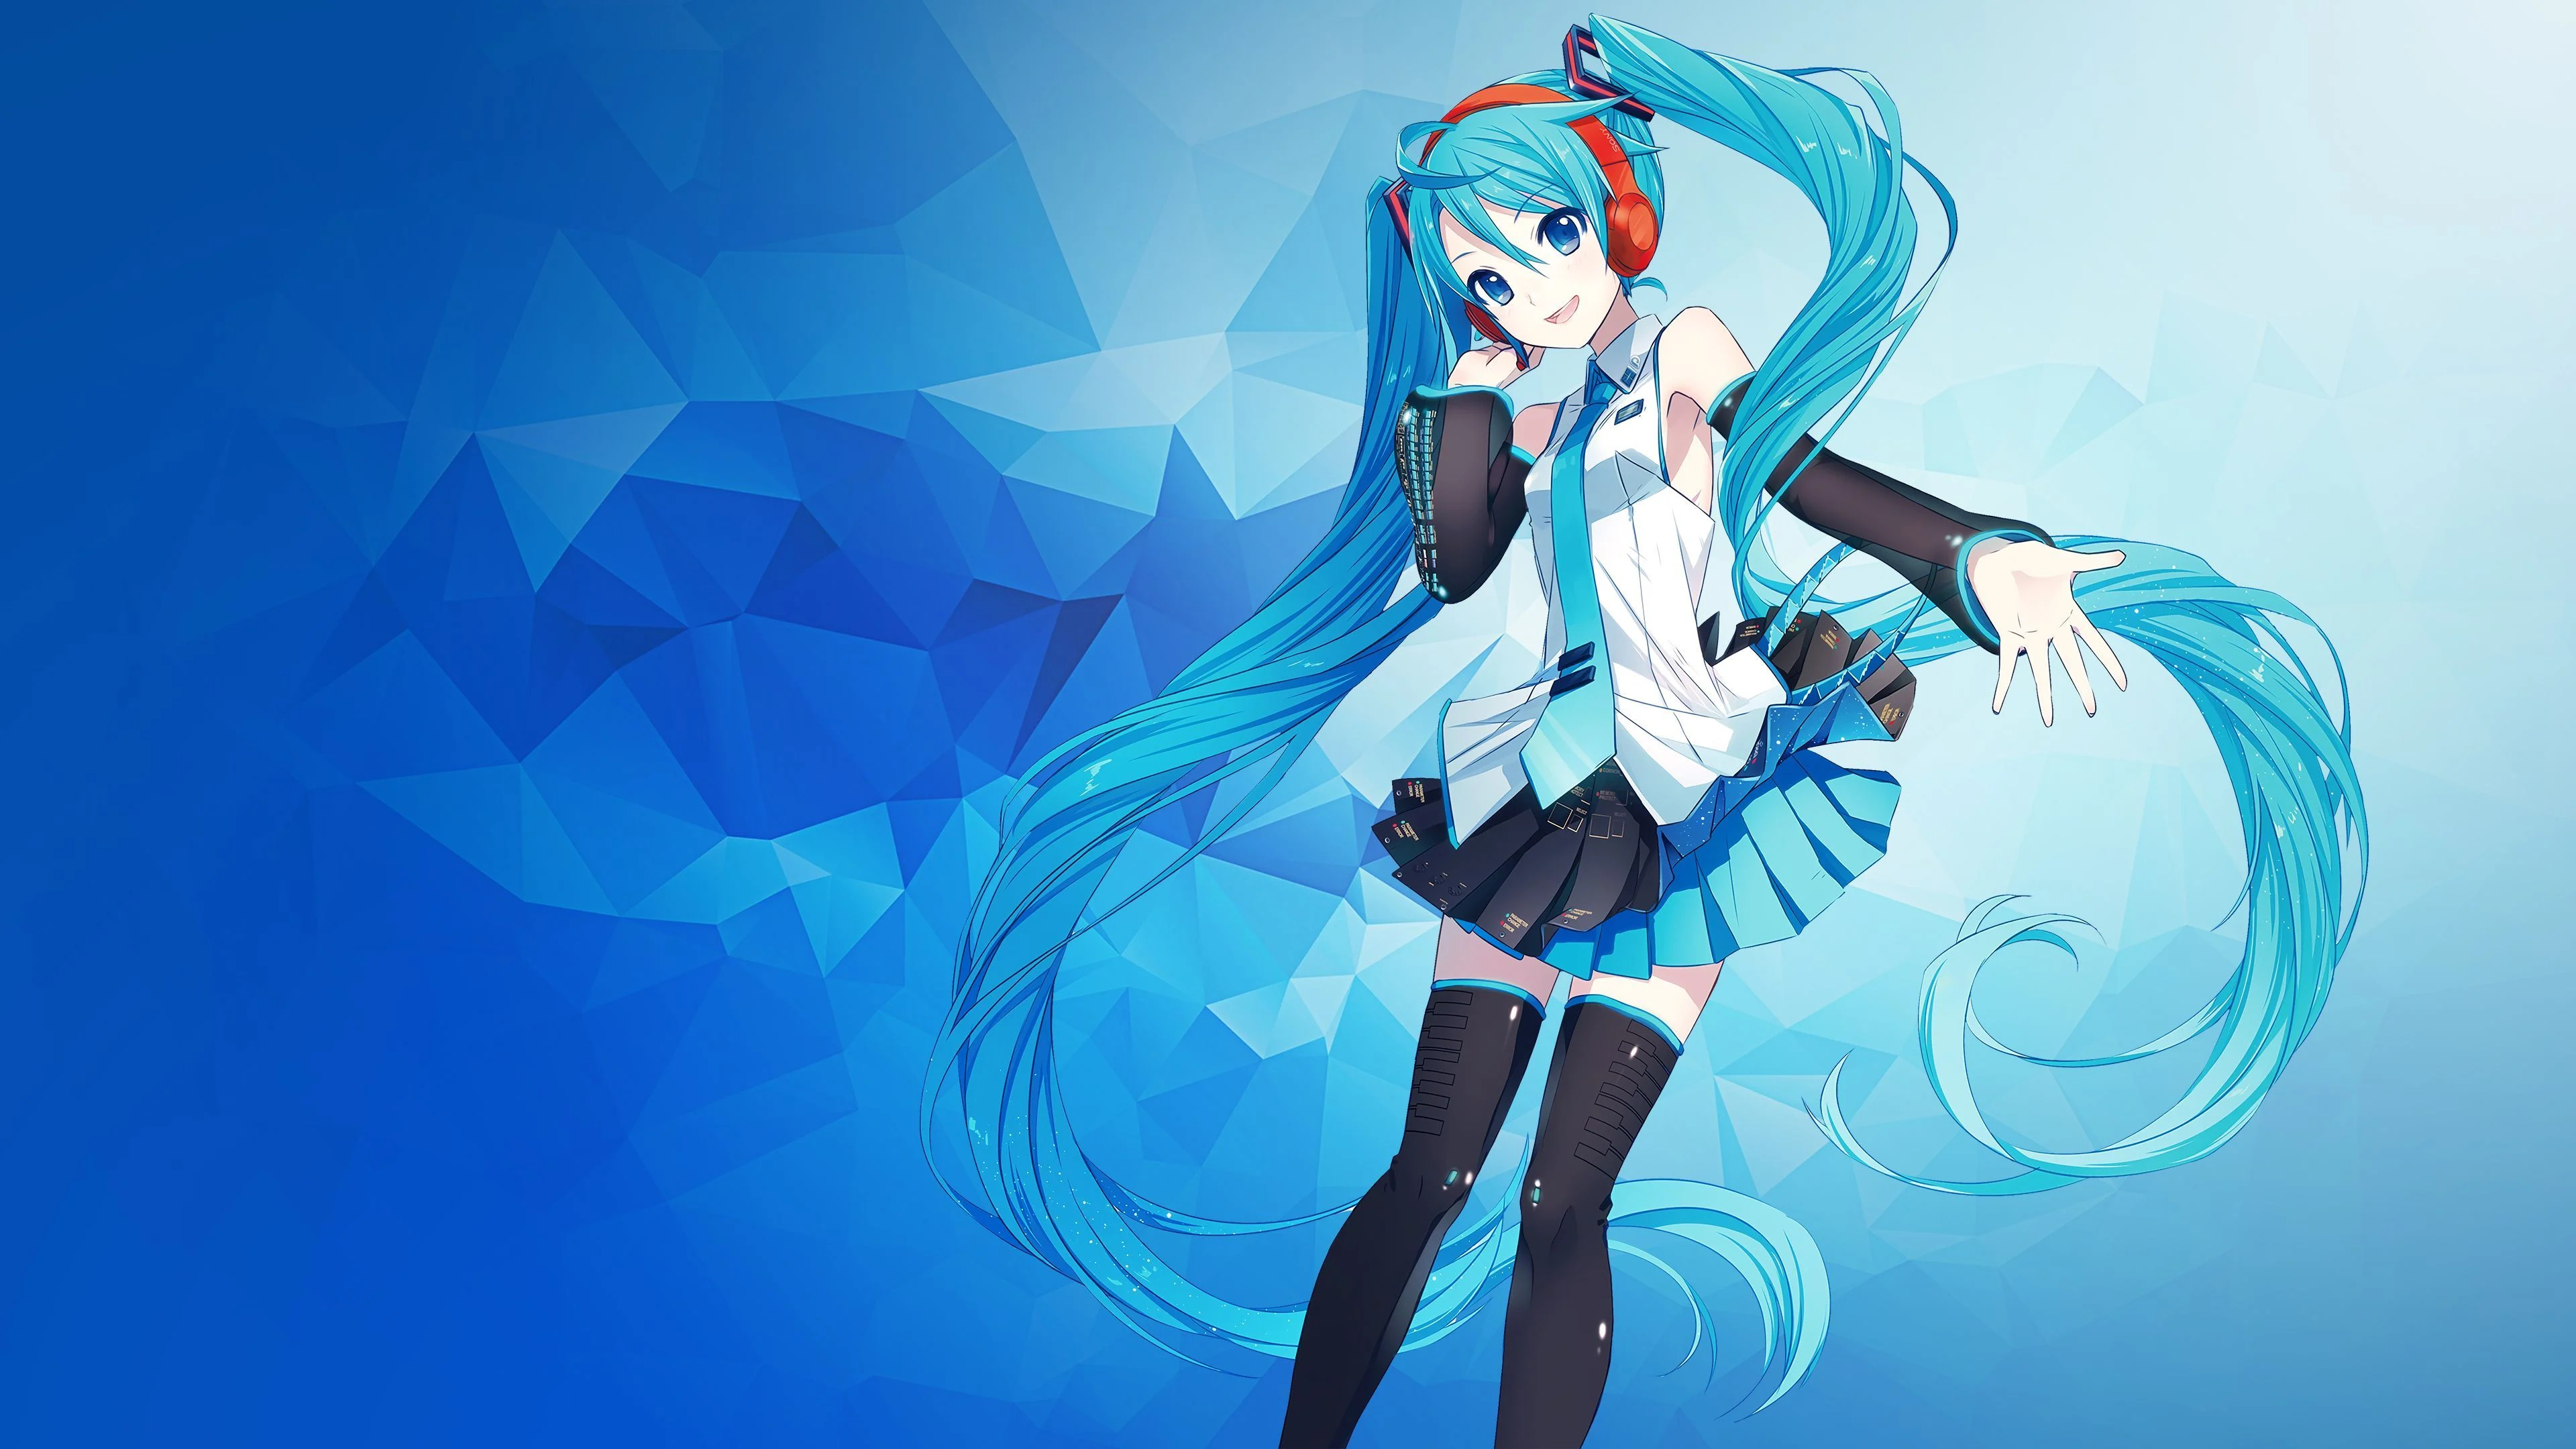 3840x2160 Anime Vocaloid Wallpapers Top Free Anime Vocaloid Backgrounds